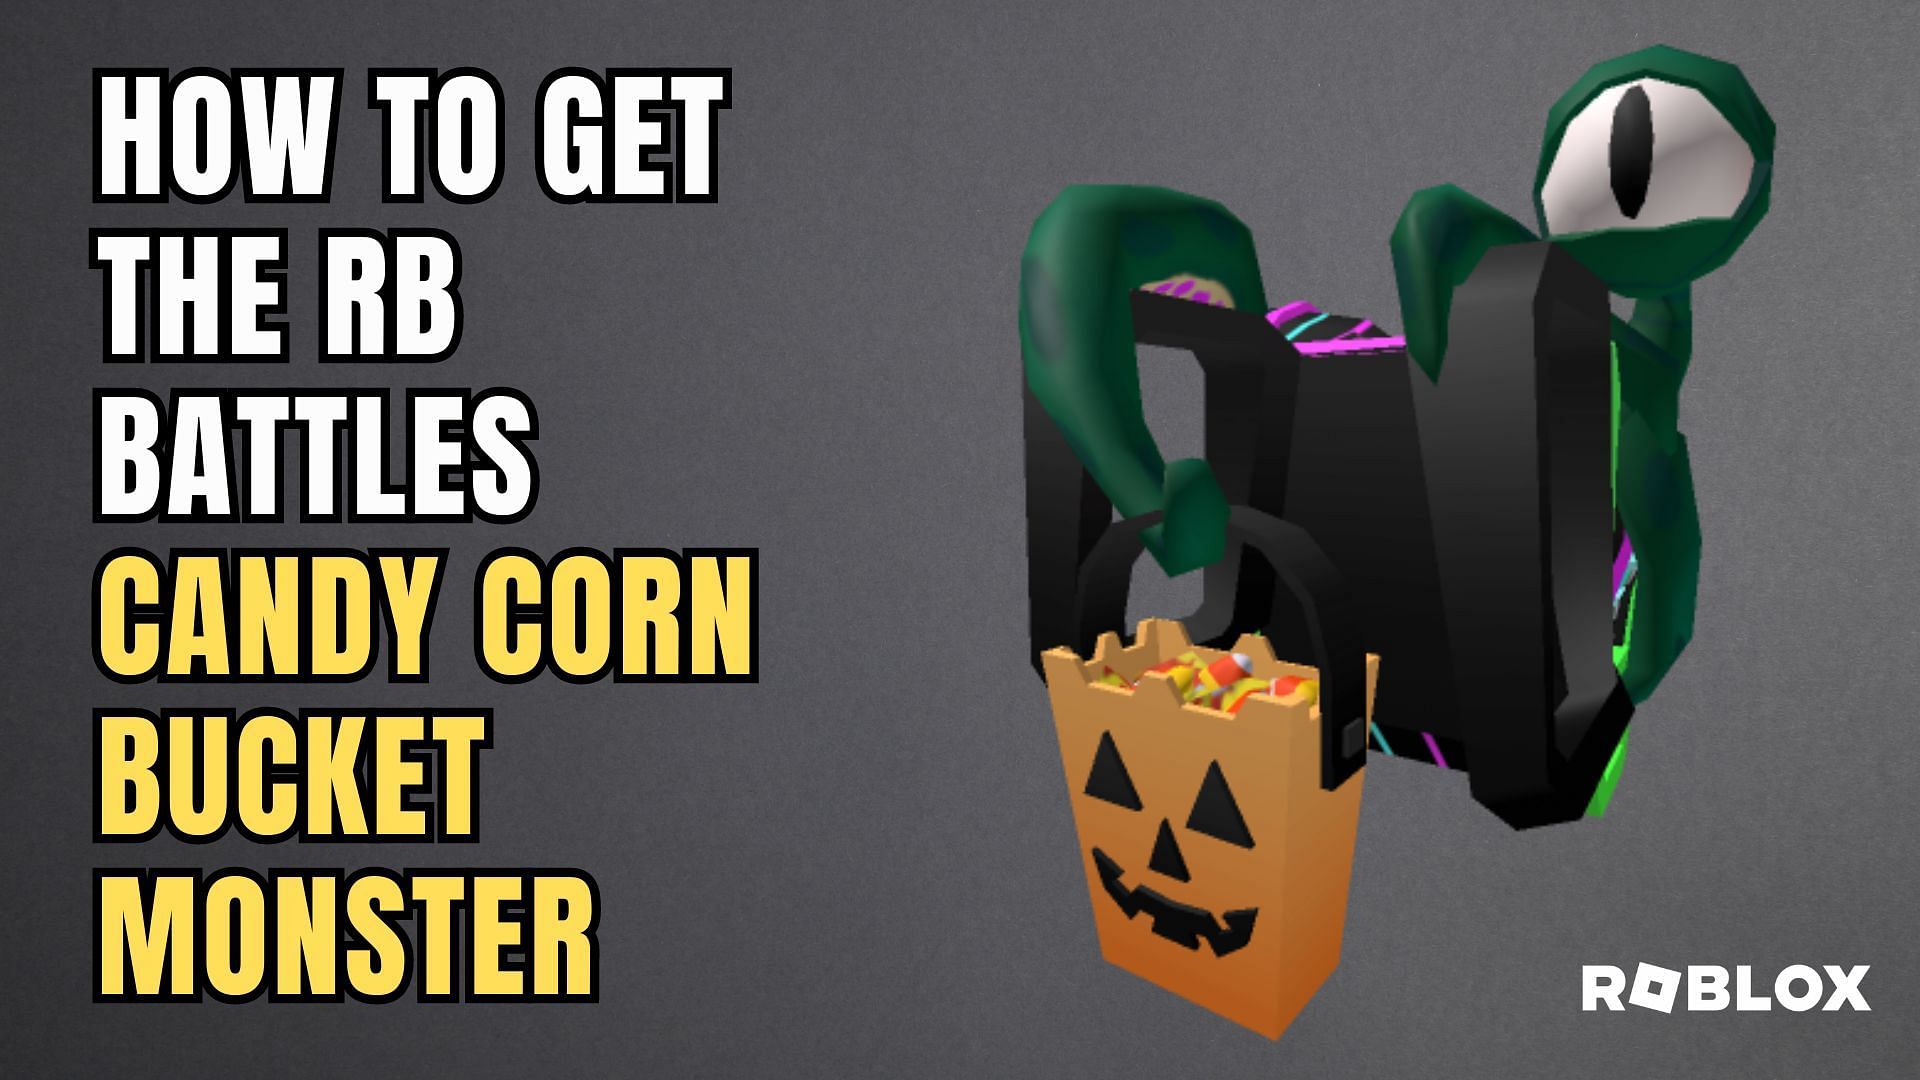 Unearthing the Candy Corn Bucket Monster in Roblox RB Battles. (Image via Sportskeeda)